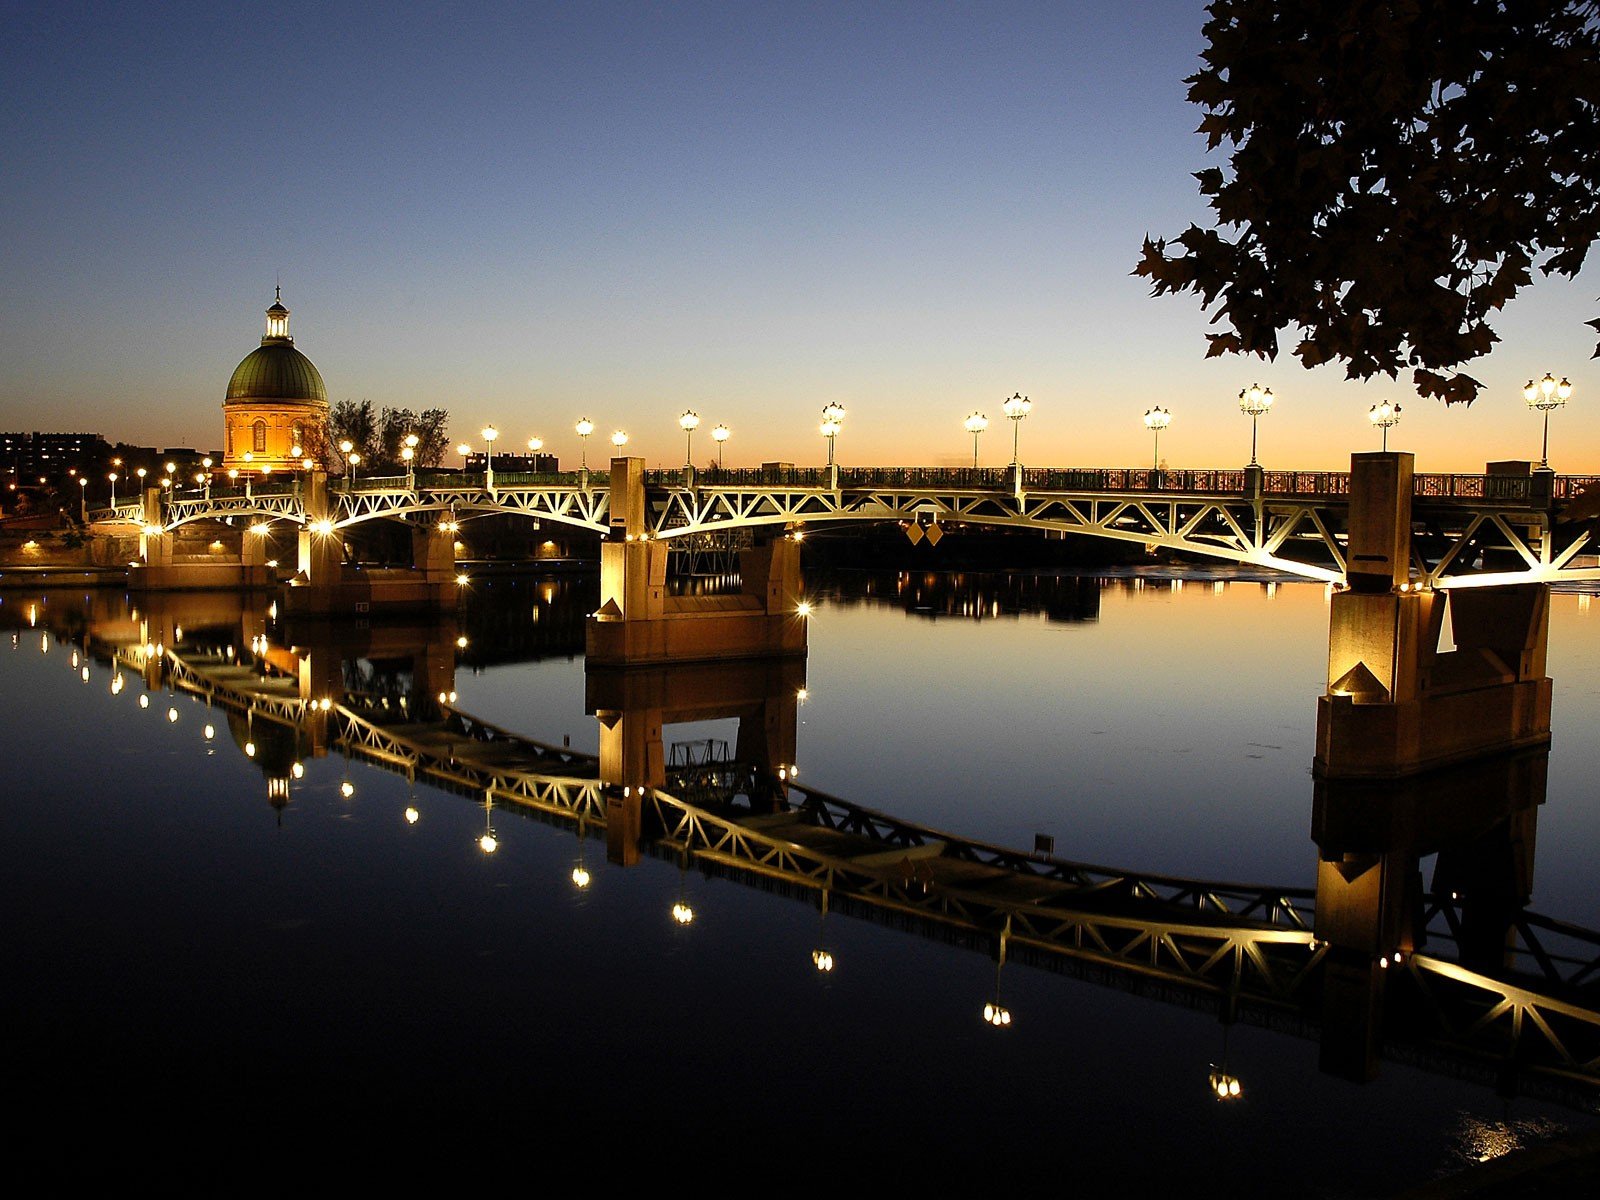 Toulouse Wallpapers